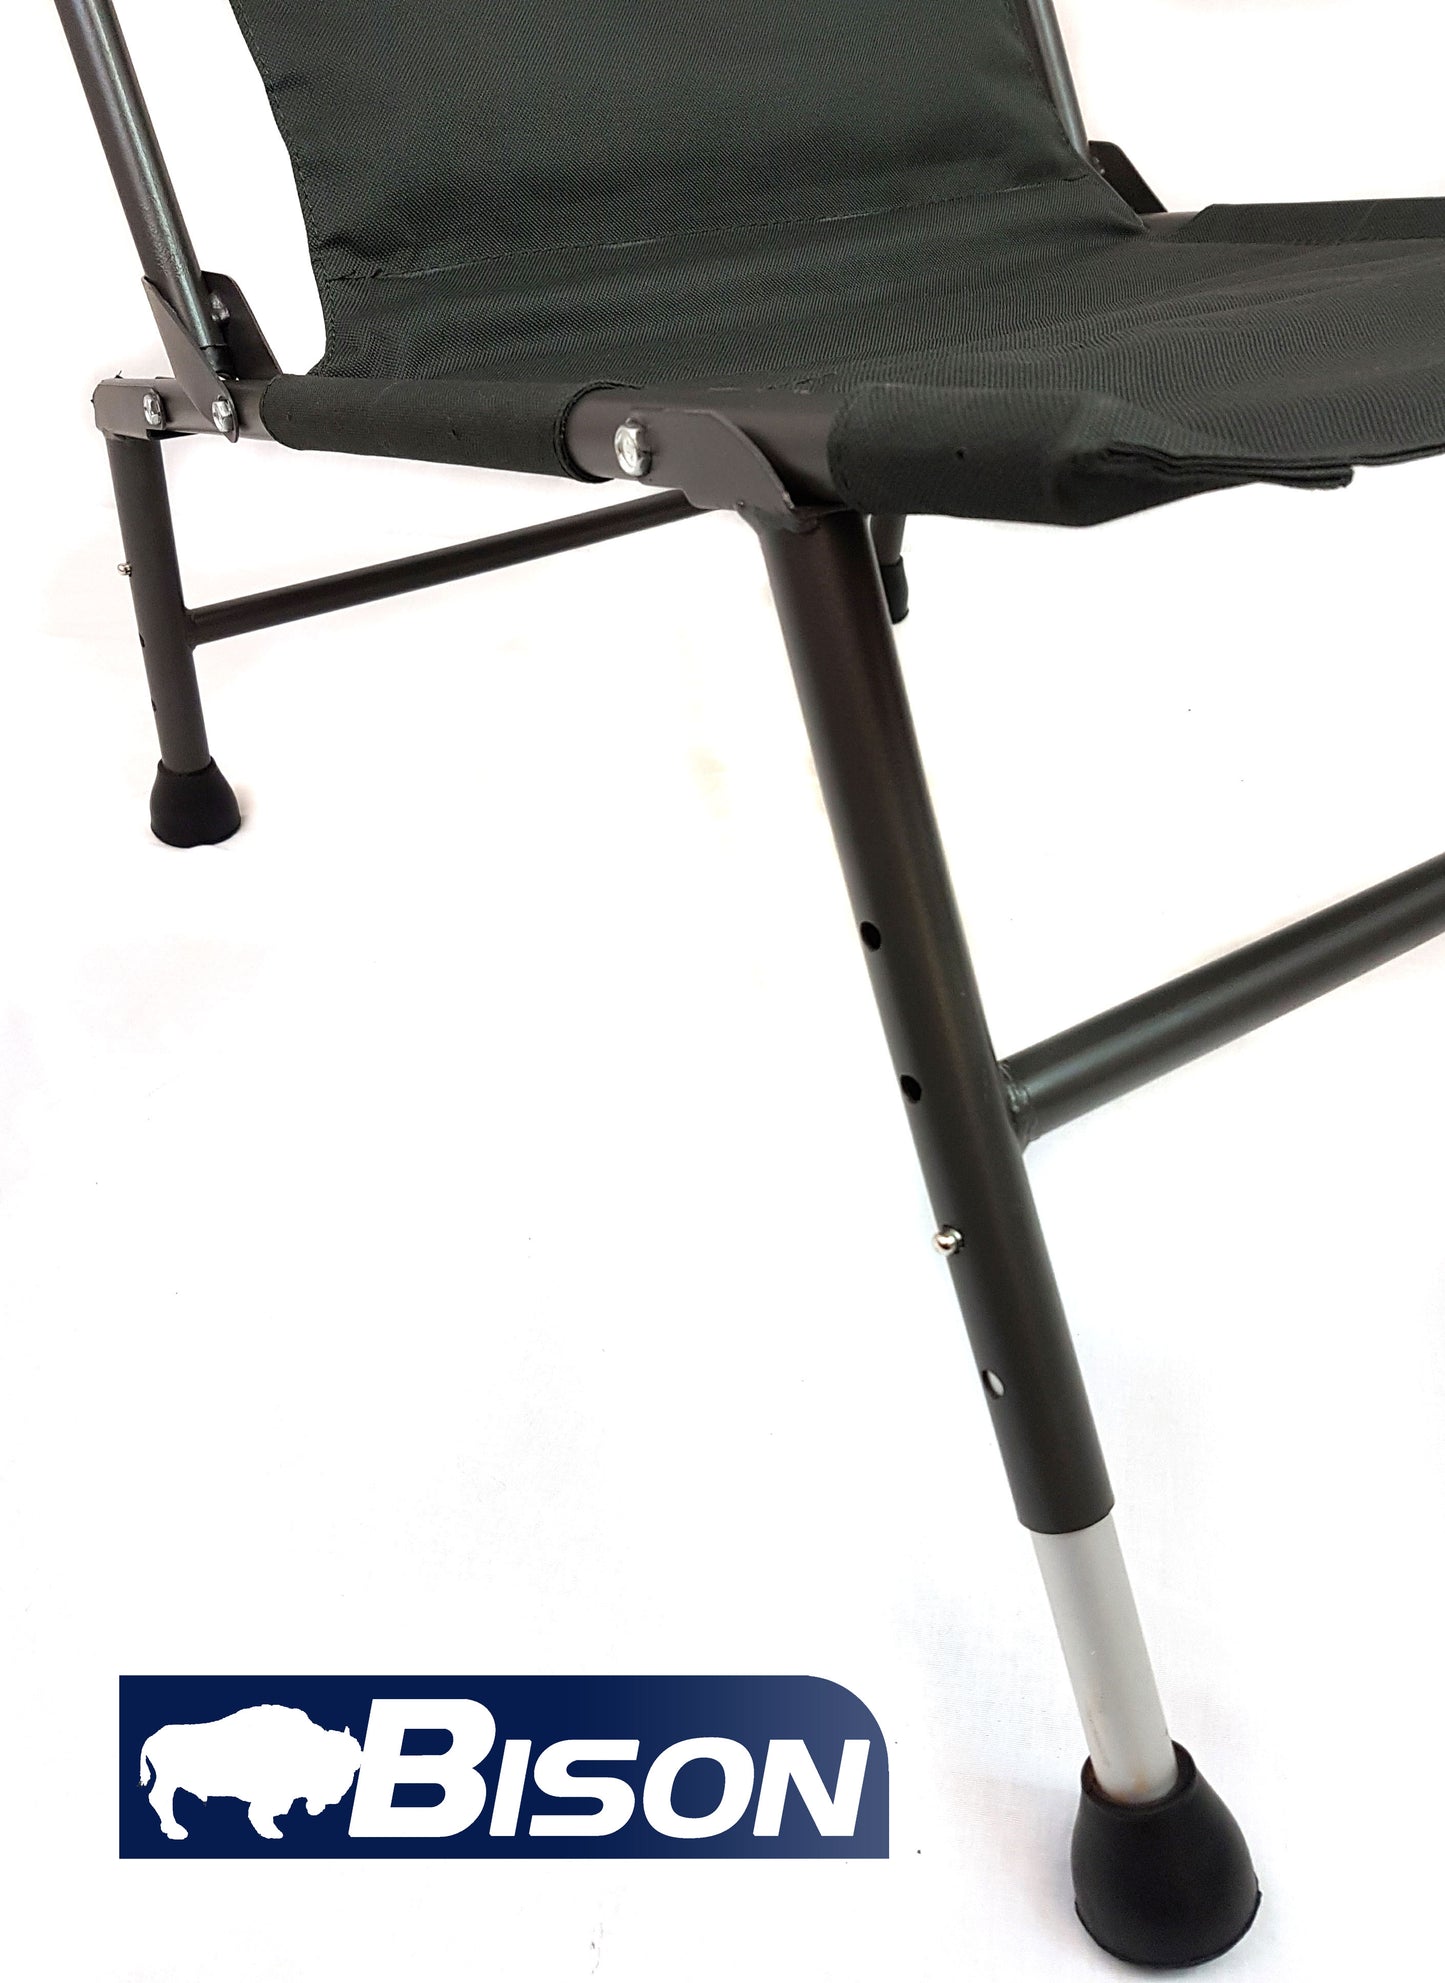 BISON CARP CHAIR ADJUSTABLE FISHING CHAIR, CLEARANCE OFFER